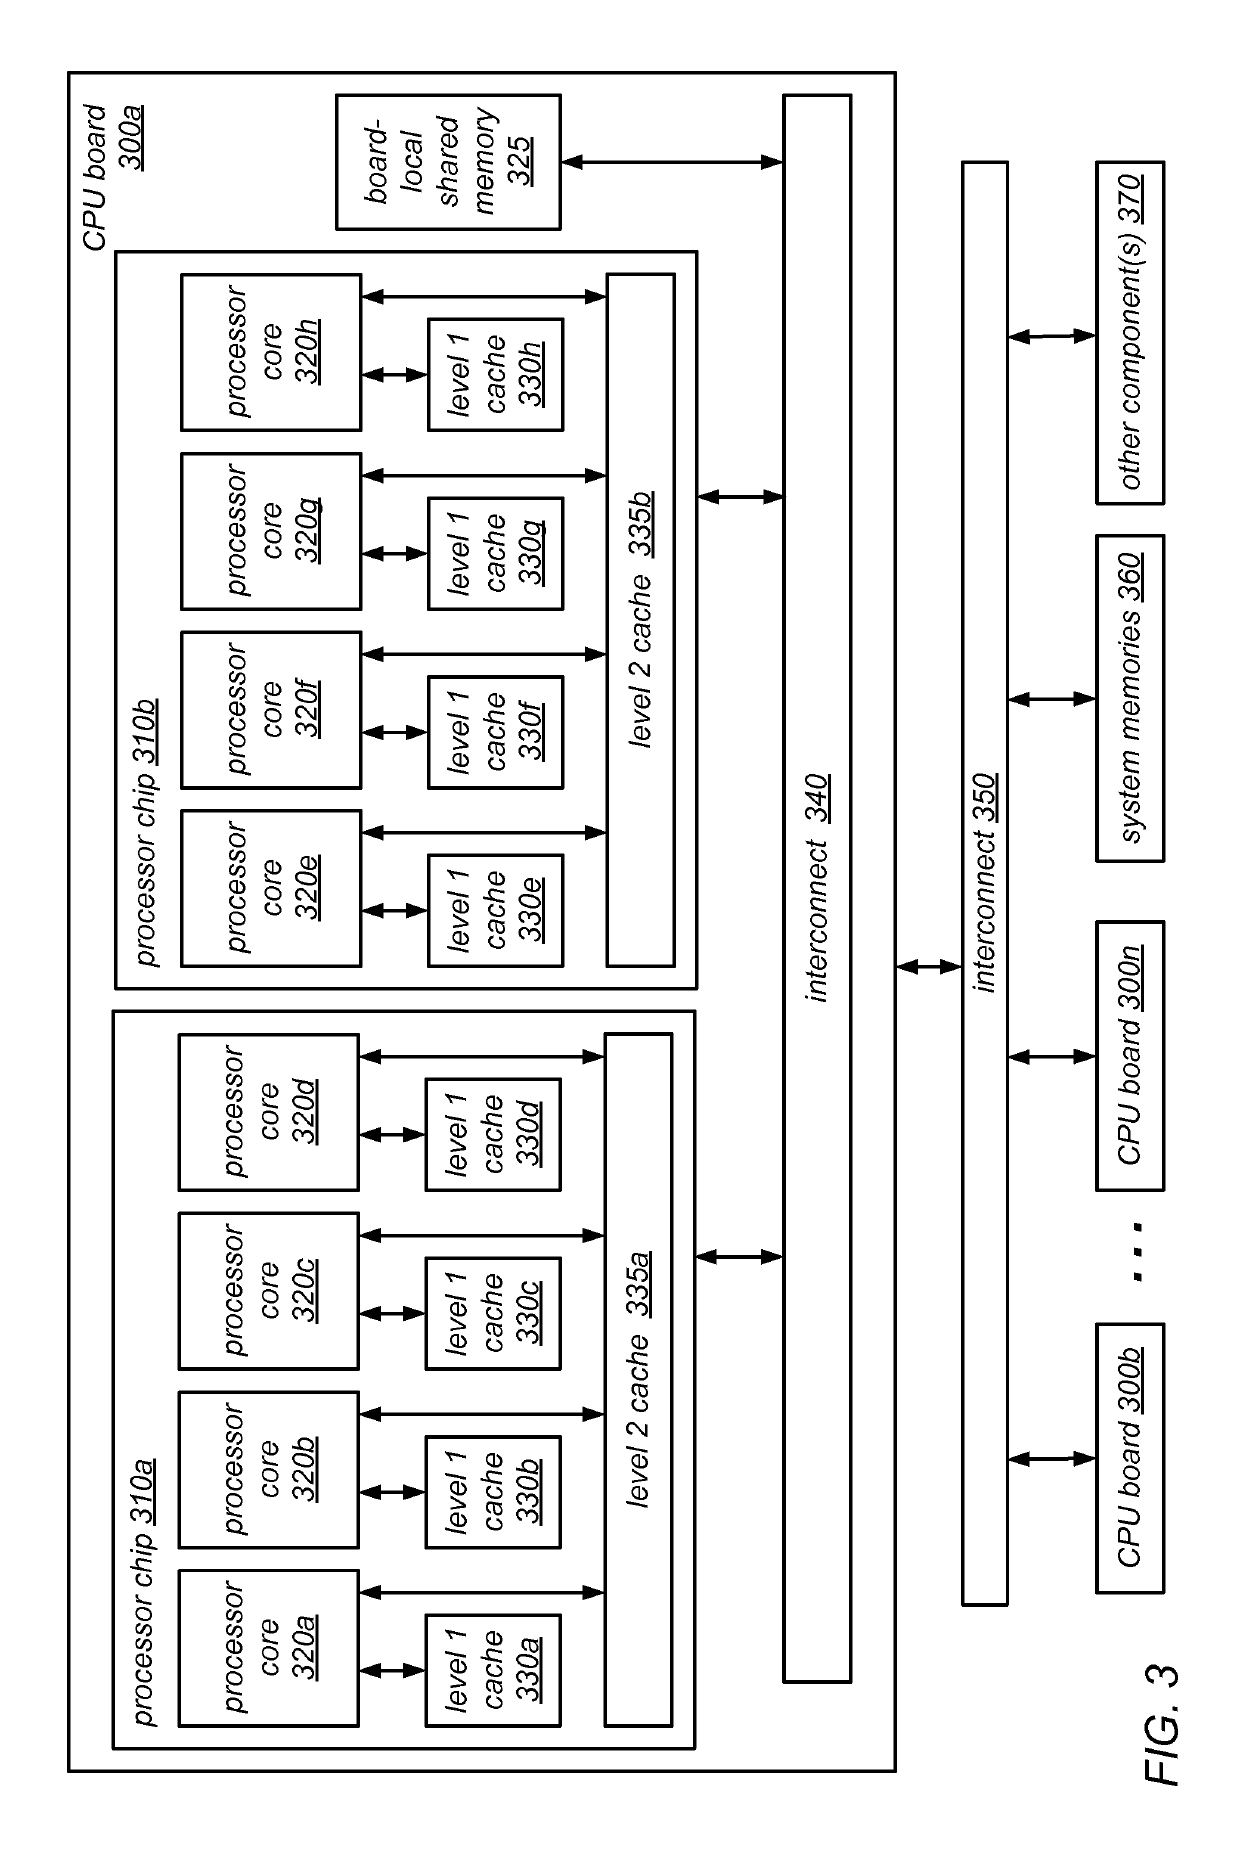 Systems and methods for performing concurrency restriction and throttling over contended locks